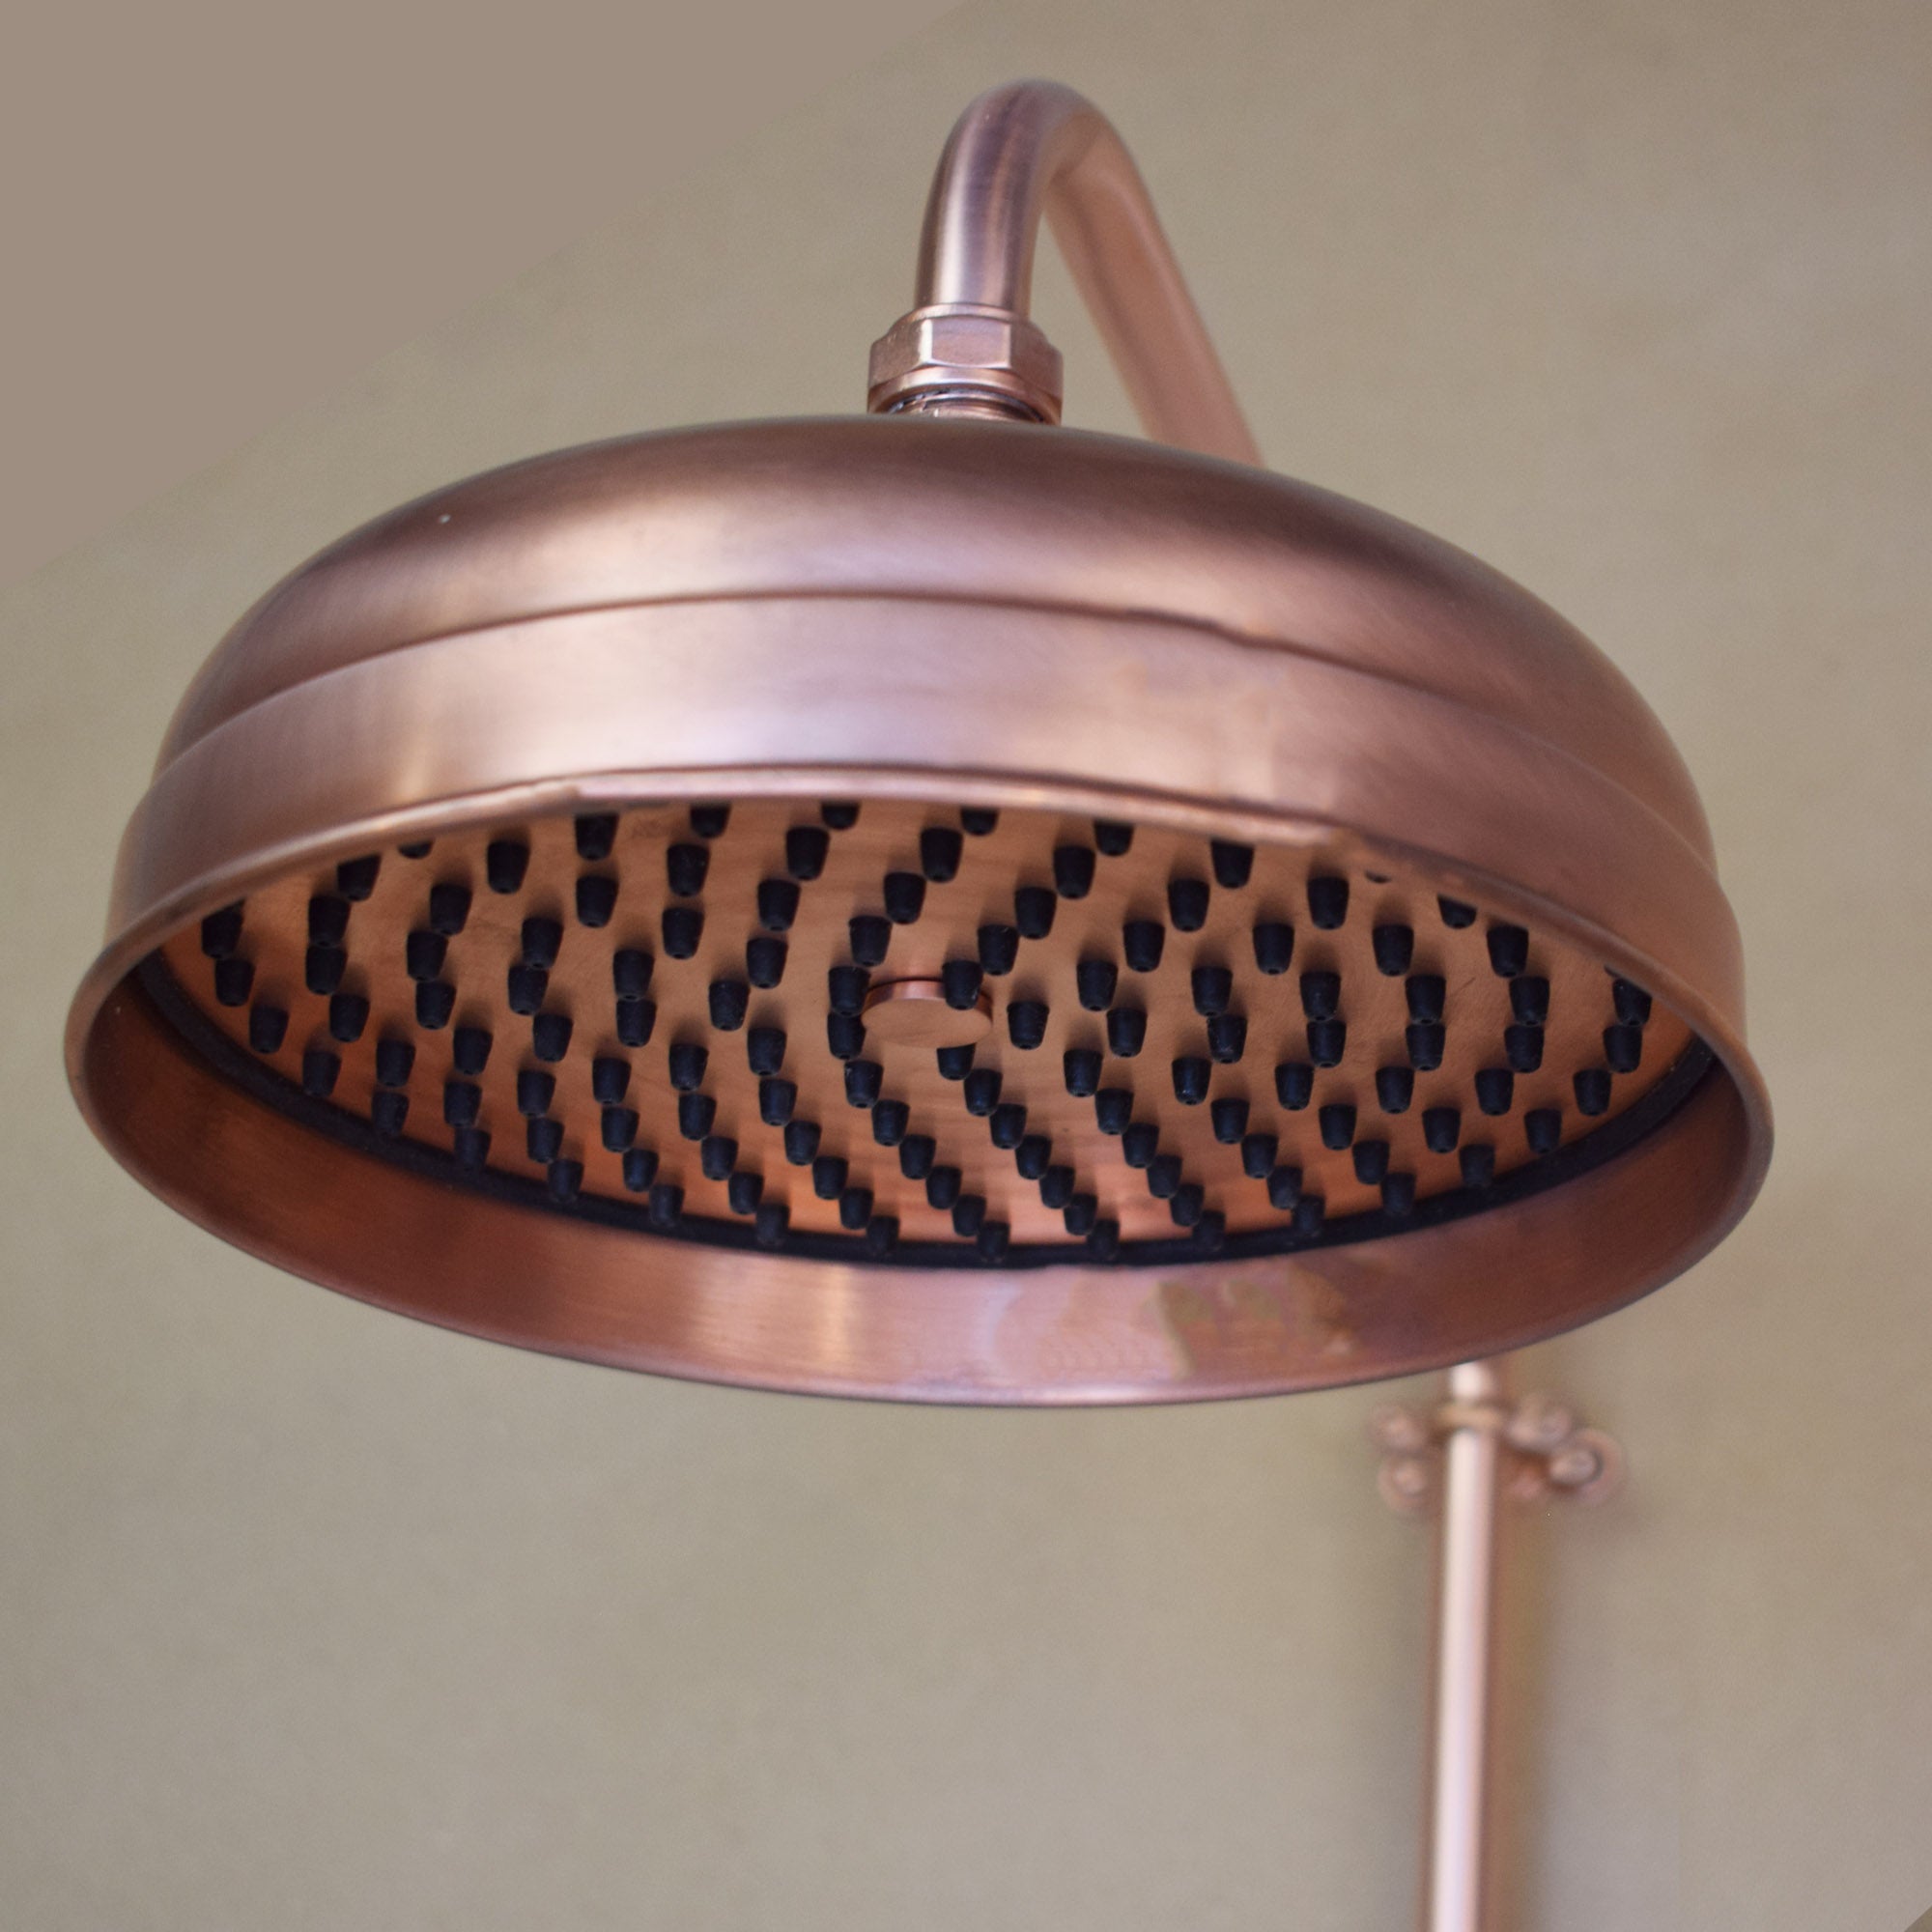 genuine copper rainfall shower head - showers for sale